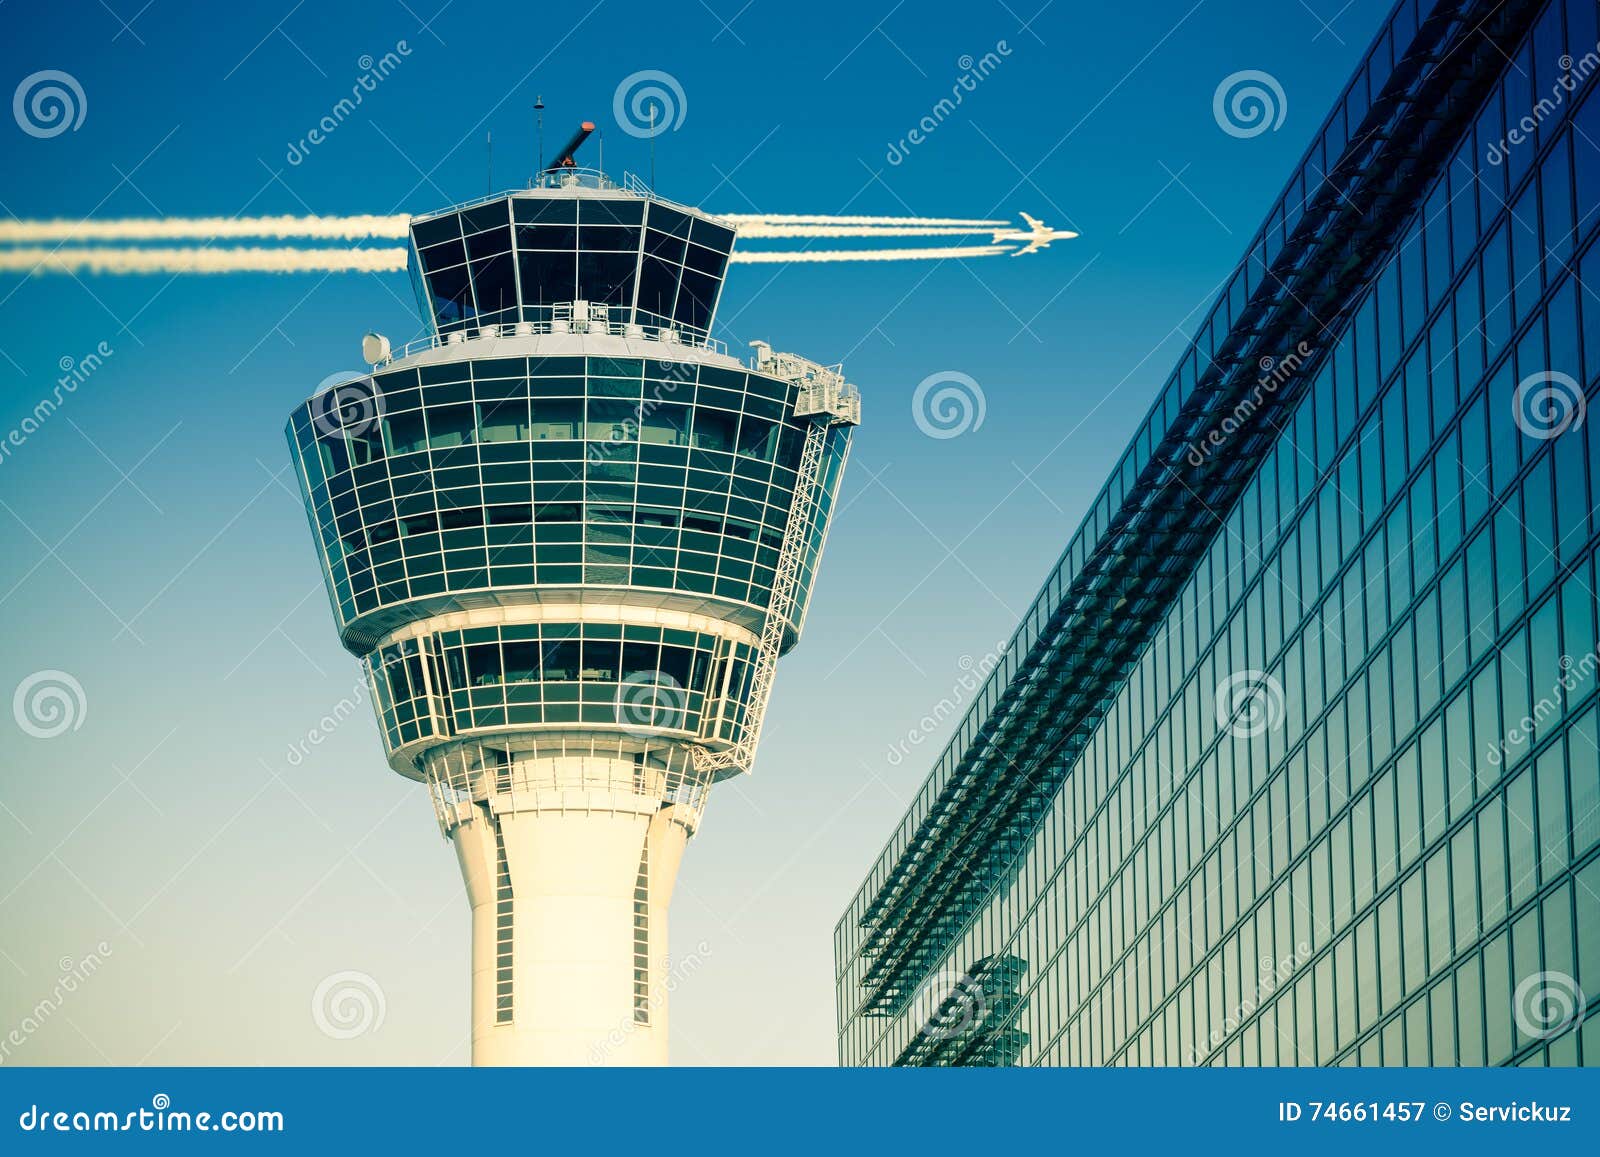 flights management air control tower passenger terminal and flying plane